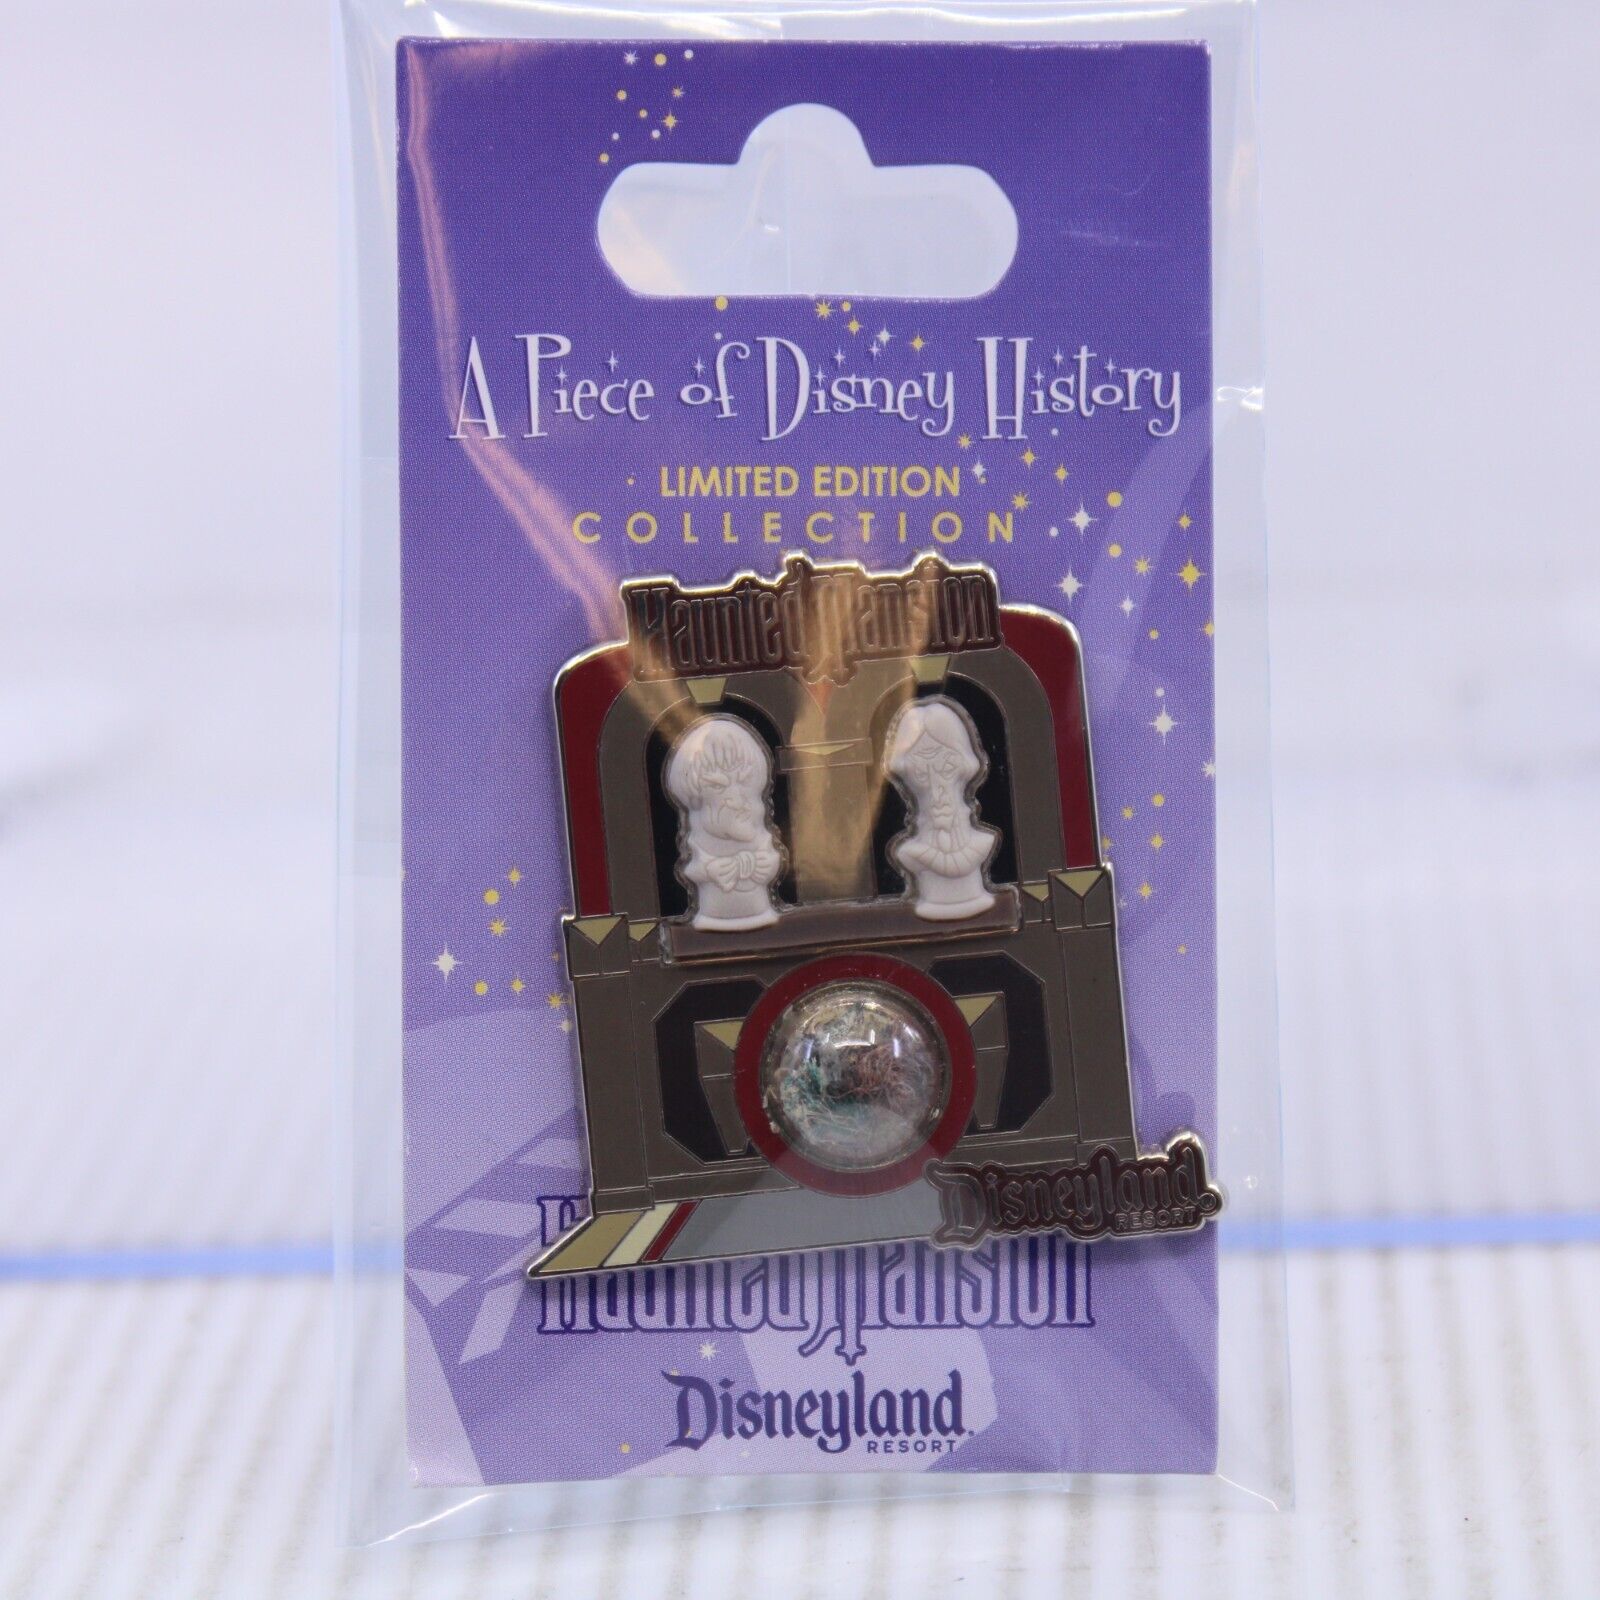 C2 Disney DLR LE Pin Piece of History PODH POH Haunted Mansion Busts